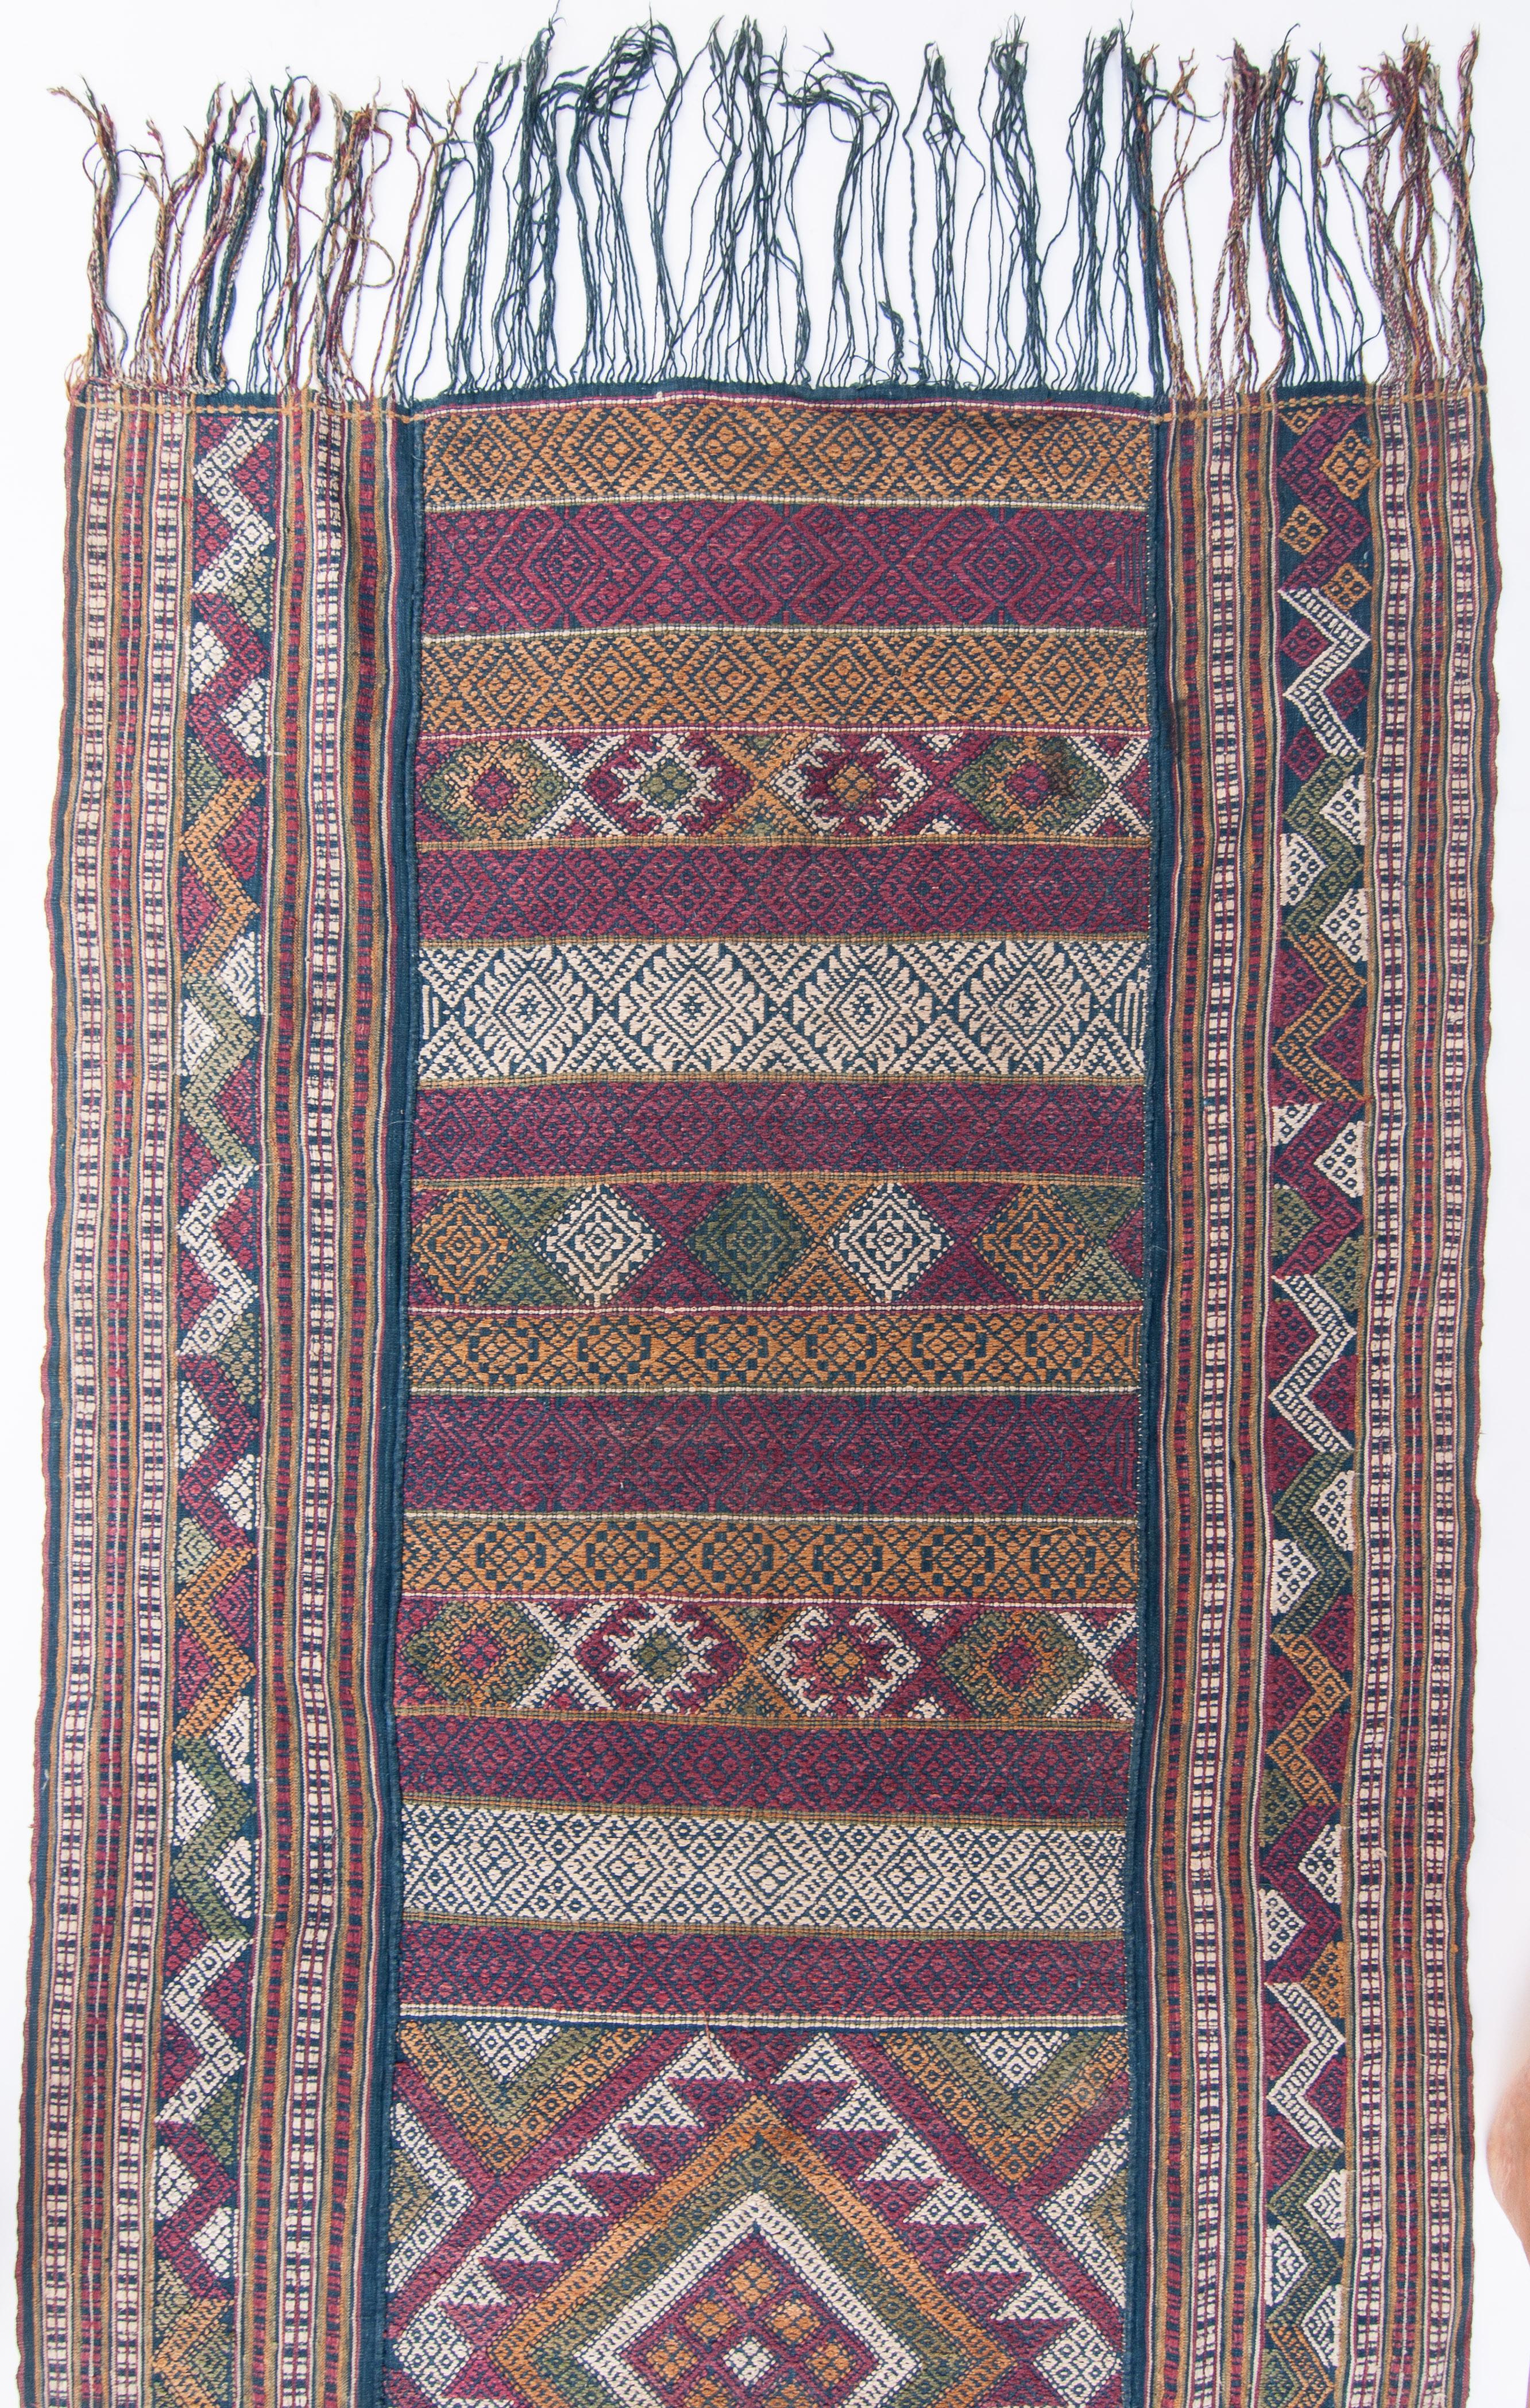 Vintage Bhutanese ceremonial wild silk textile on hand spun cotton ground. Chagsi Pangkheb, early 20th century.
This type of textile was reserved for special occasions and for persons of high stature. This piece incorporates geometric, floral and